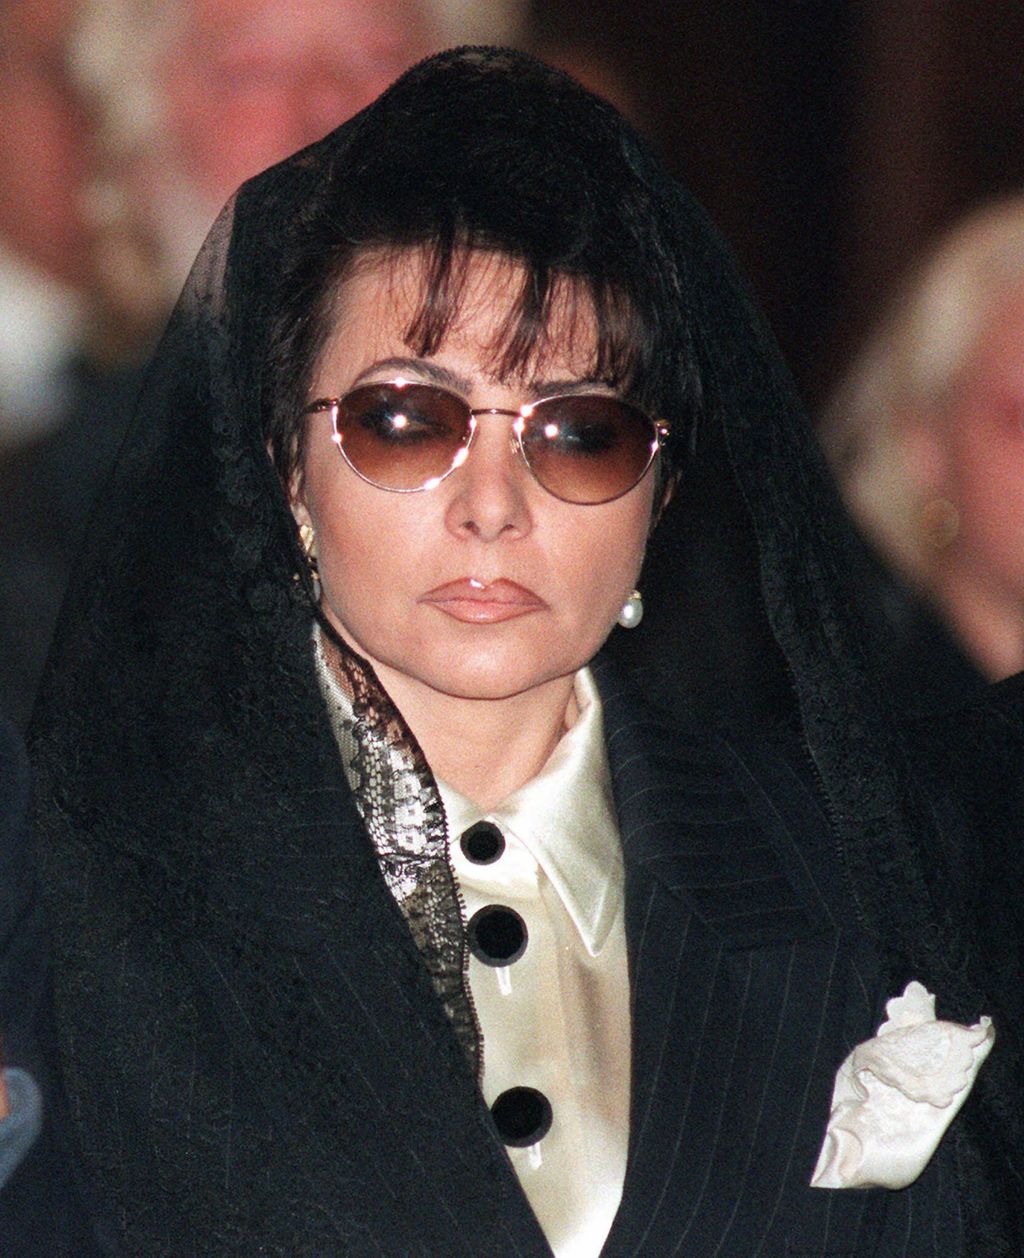 ** FILE ** Patrizia Reggiani Martinelli, 49, is shown at the funeral of her former husband, Maurizio Gucci, in Milan, in this April 3, 1995 file photo. Italy's top court on Wednesday, Jan. 25, 2006 rejected a request by slain fashion heir Maurizio Gucci's ex-wife to serve the rest of her prison term for his 1995 murder under house arrest. Patrizia Reggiani Martinelli cited health problems in her request, said lawyer Danilo Buongiorno. He said the woman suffered brain damage during surgery for a brain tumor years ago and also suffers from epilepsy. (AP Photo/Luca Bruno/files)